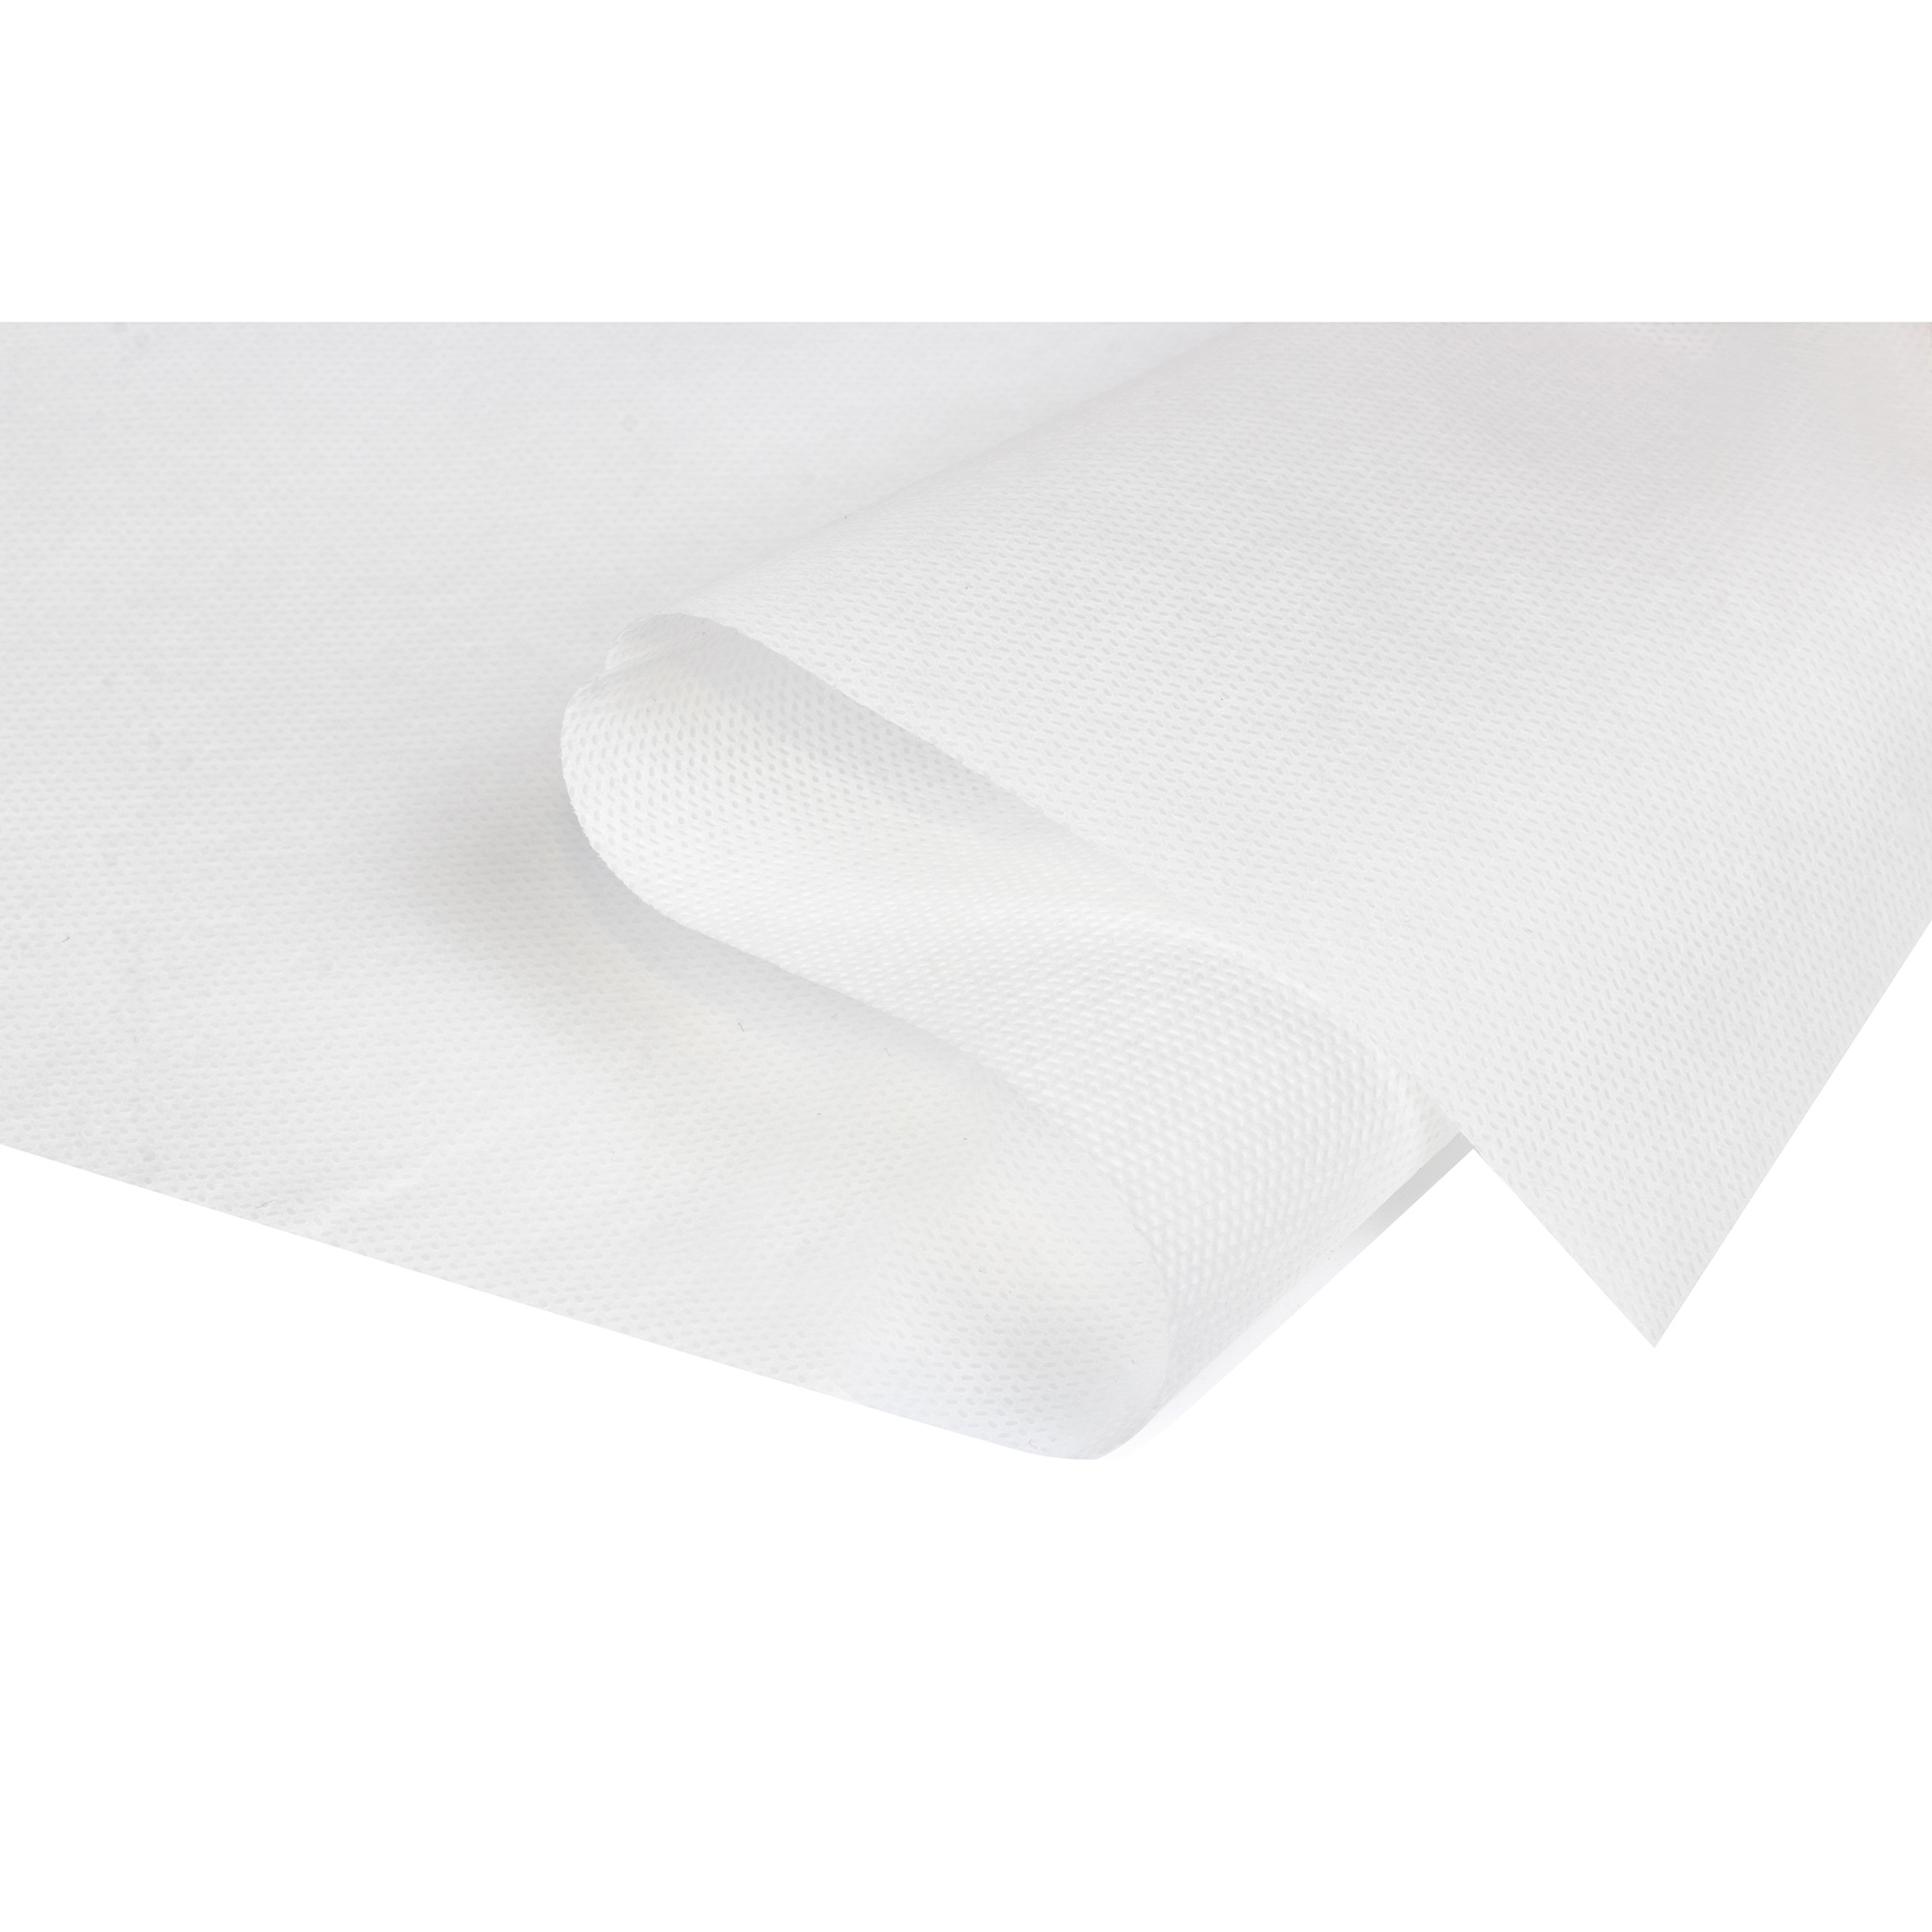 One Stop shop high quality 100% PP nonwoven fabric in various color